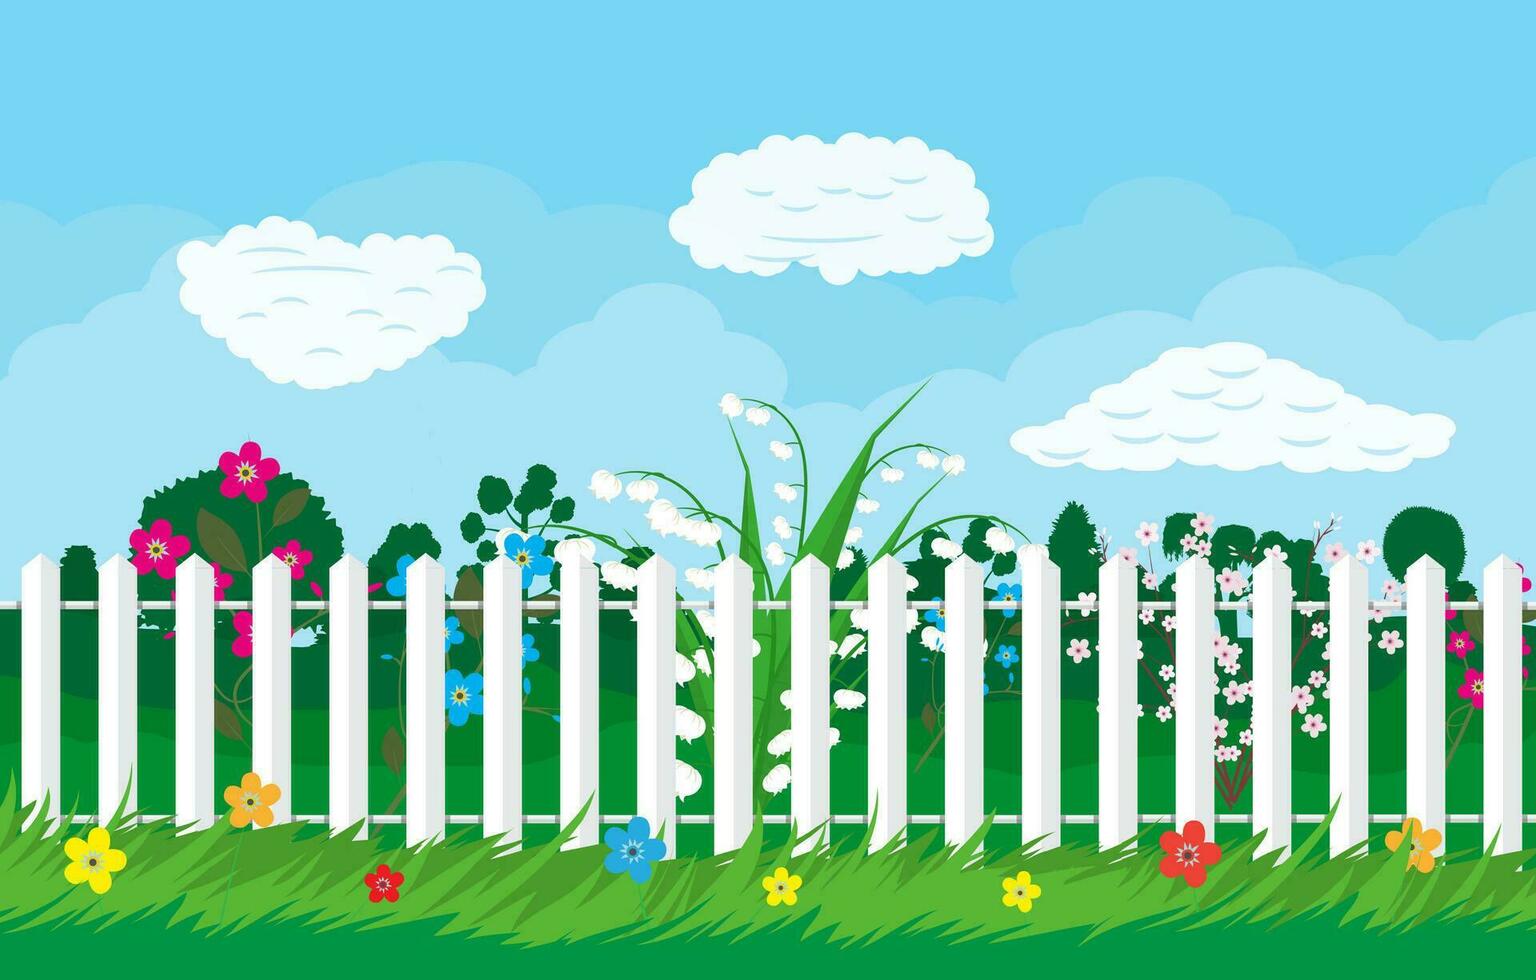 Summer nature landscape with plants and fence. Vector illustration in flat style